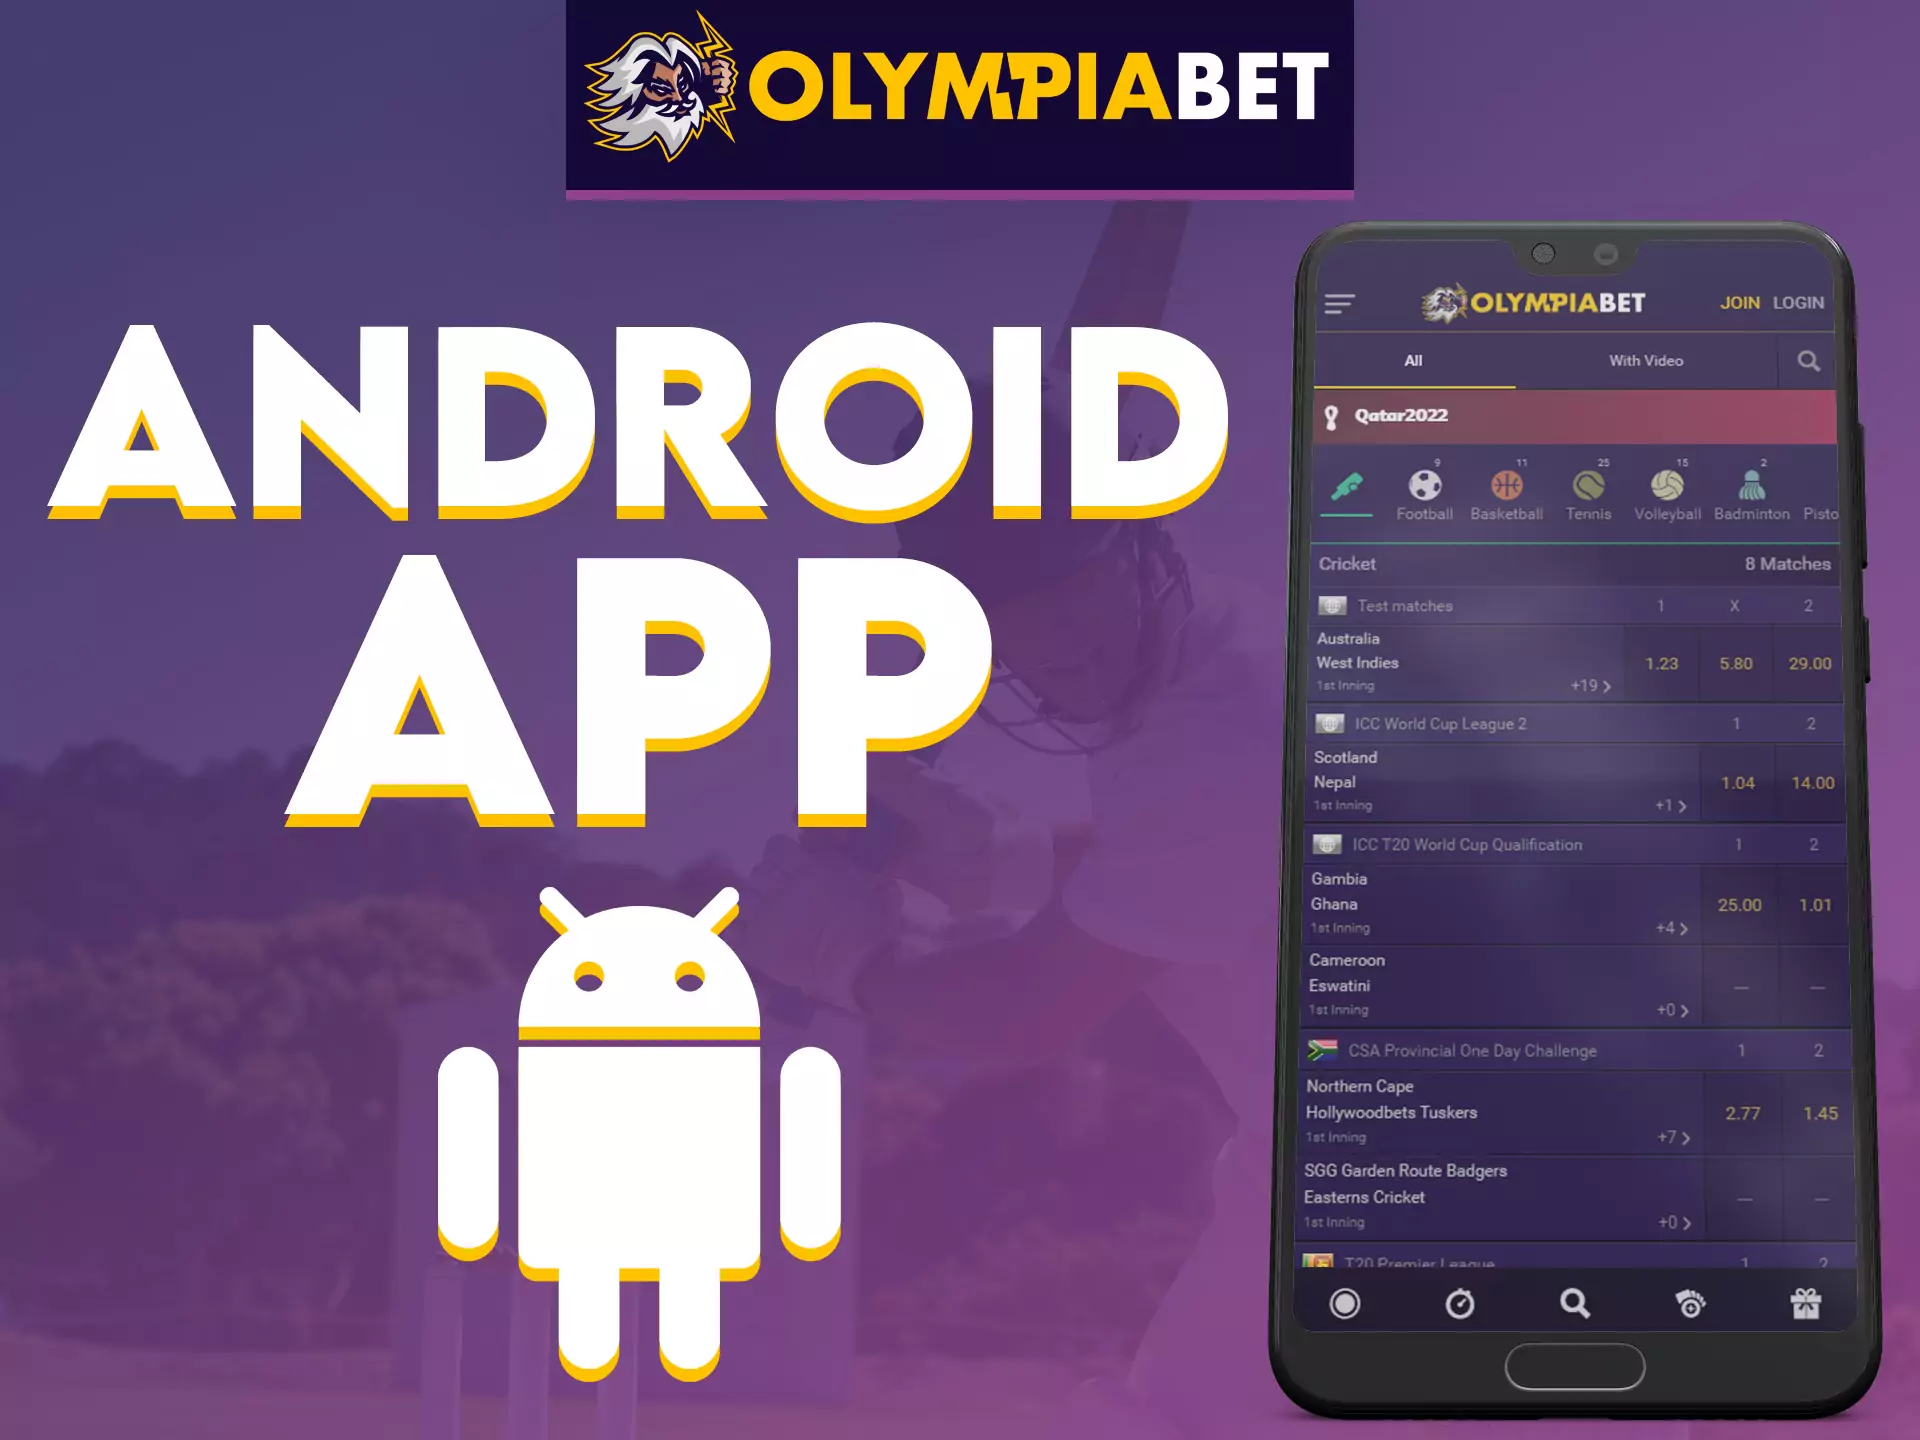 Use OlympiaBet on your Android device, get nice bonuses and place bets.